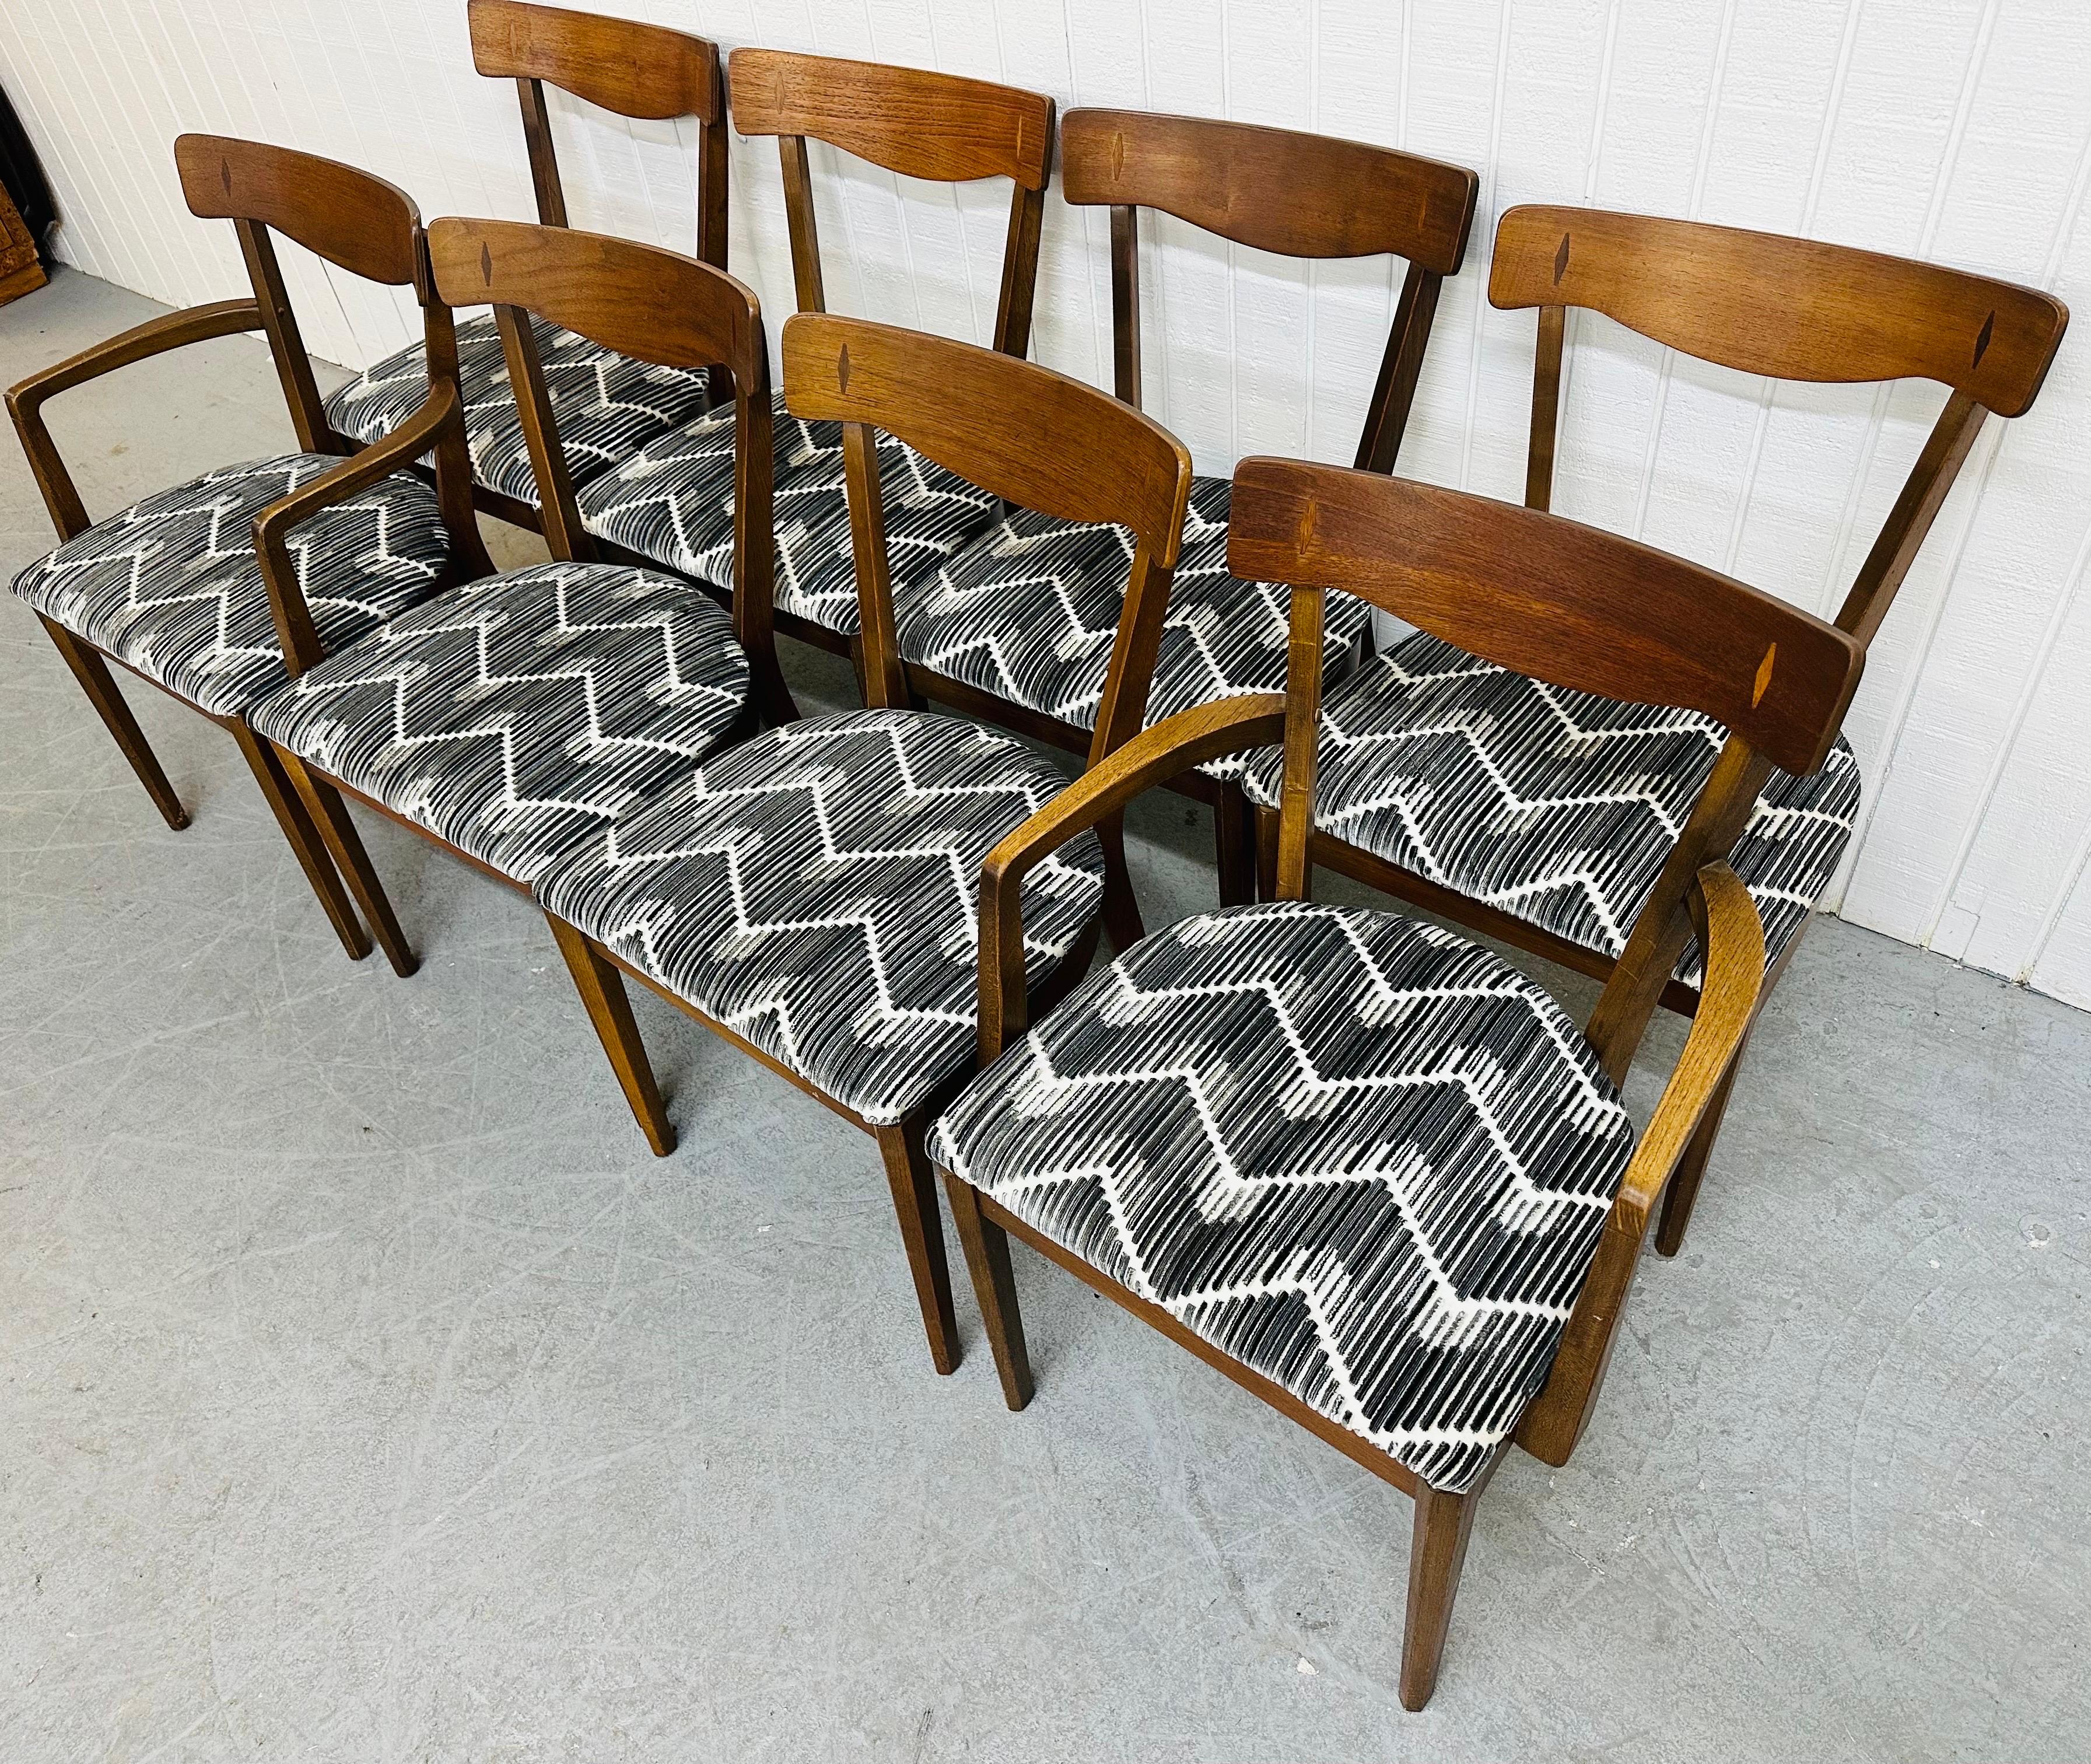 This listing is for a set of eight Mid-Century Modern Drexel Declaration Walnut Dining Chairs. Featuring two arm chairs, six straight chairs, newly upholstered seats, and a beautiful walnut finish. This is an exceptional combination of quality and